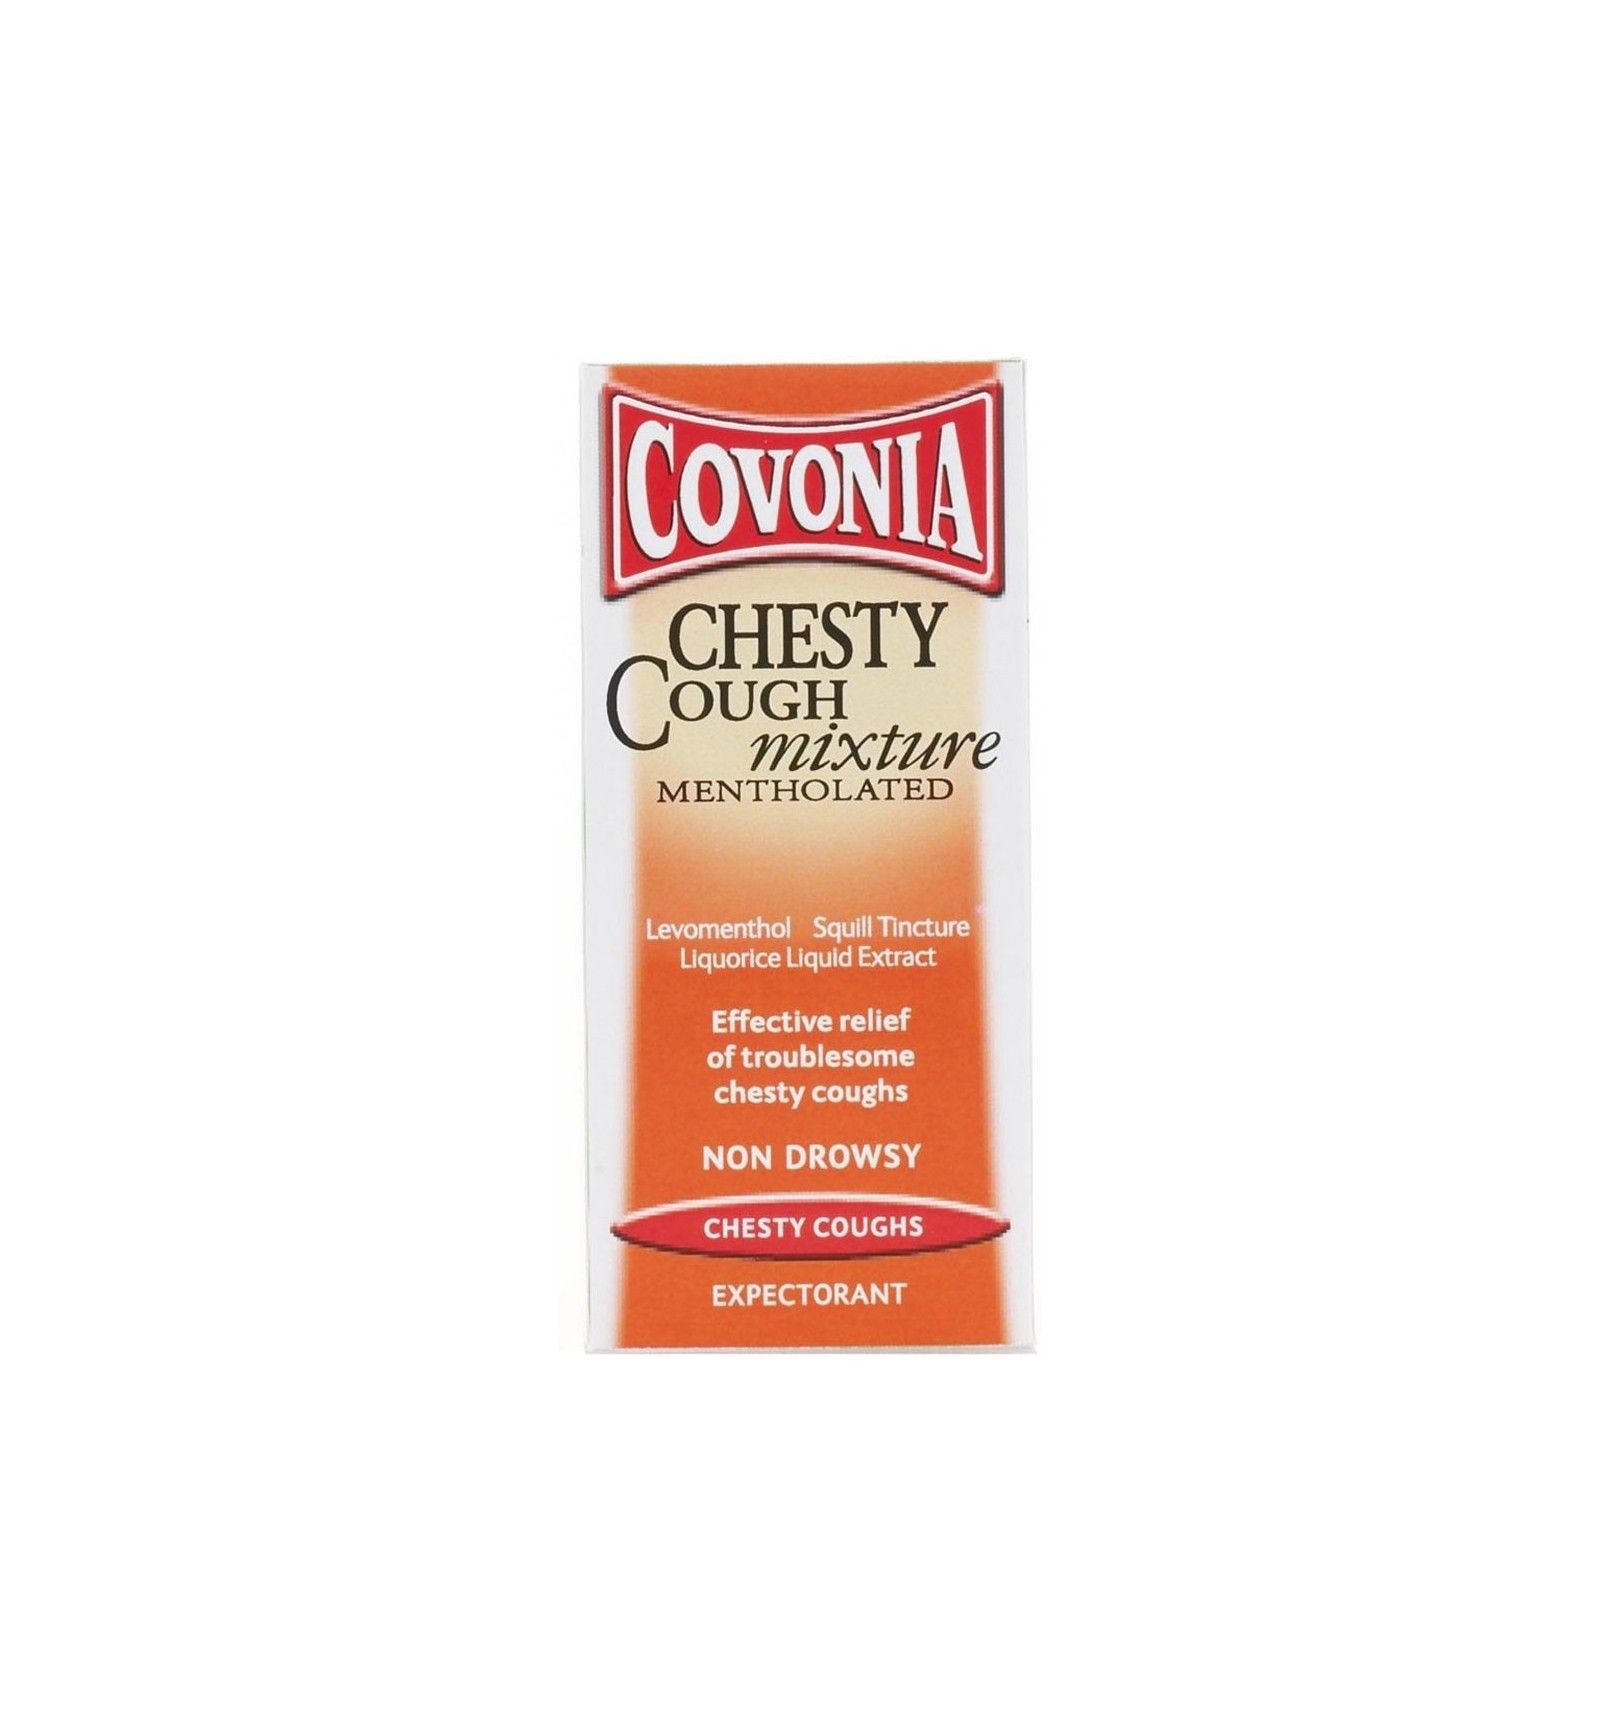 Covonia Expectorant Mentholated Chesty Cough Mixture 50ml